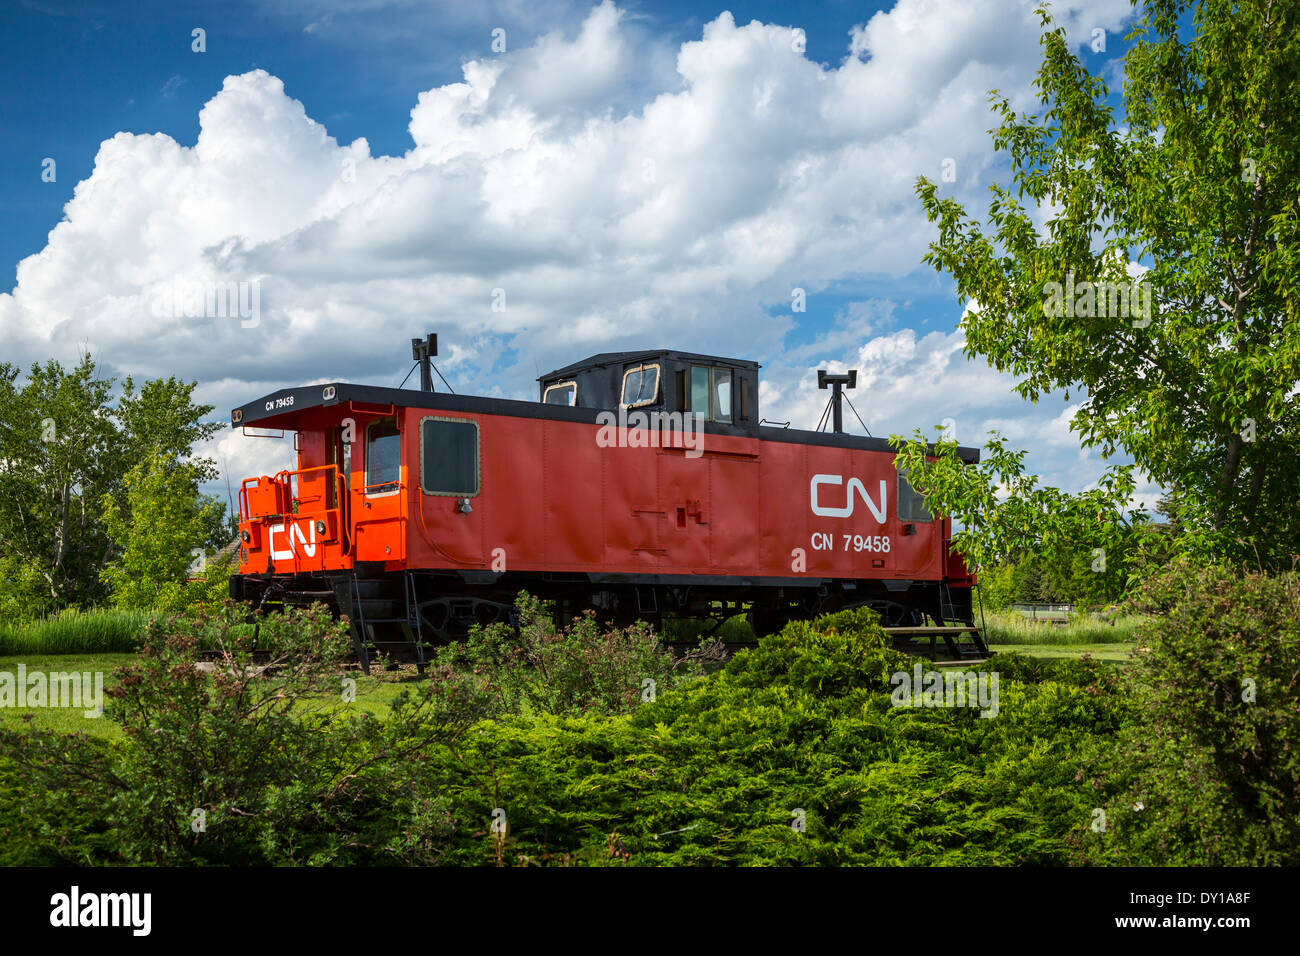 The red CN caboose is a part of history located in a small park in Vegreville, Alberta, Canada. Stock Photo